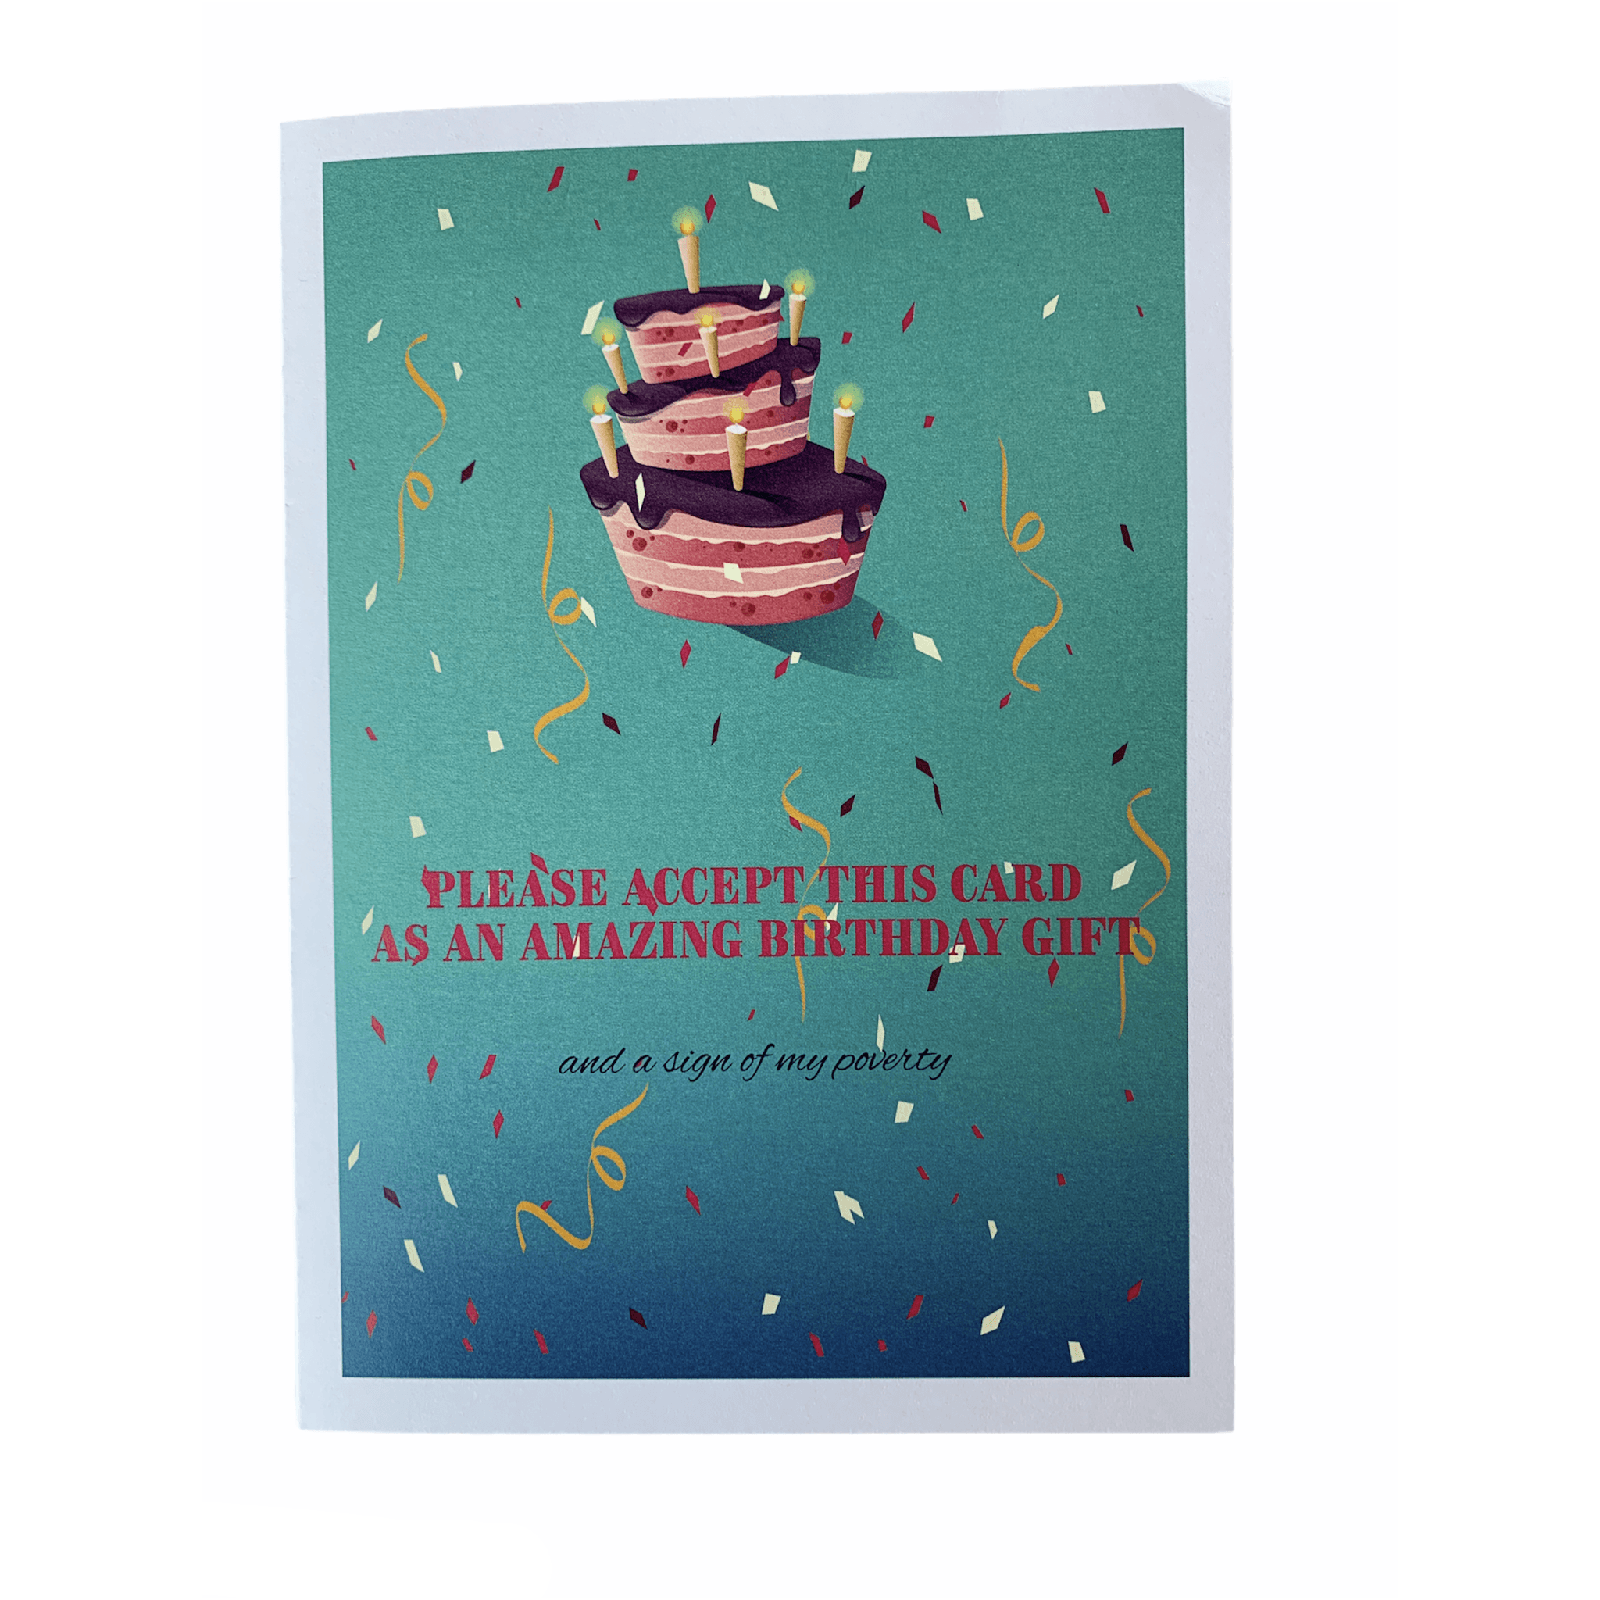 Please Accept this Card - Greeting Card - Birthday